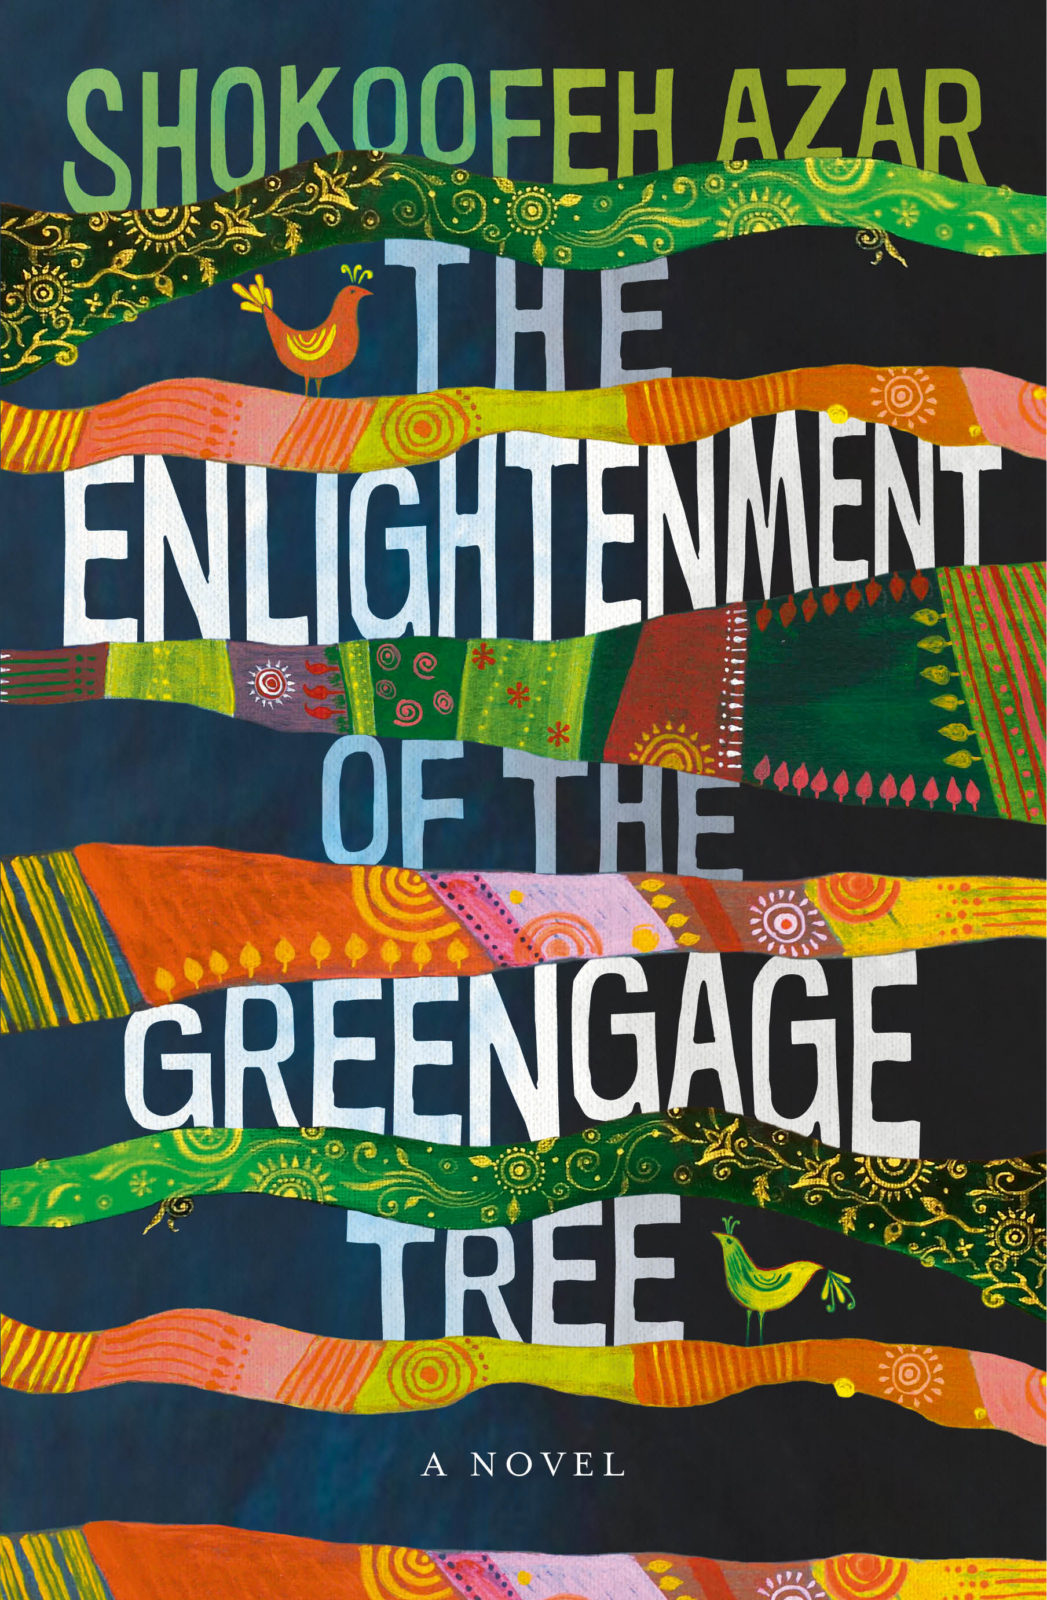 Buchcover Shokoofeh Azars: "The Enlightenment of the Greengage Tree"; Foto: Europa Editions